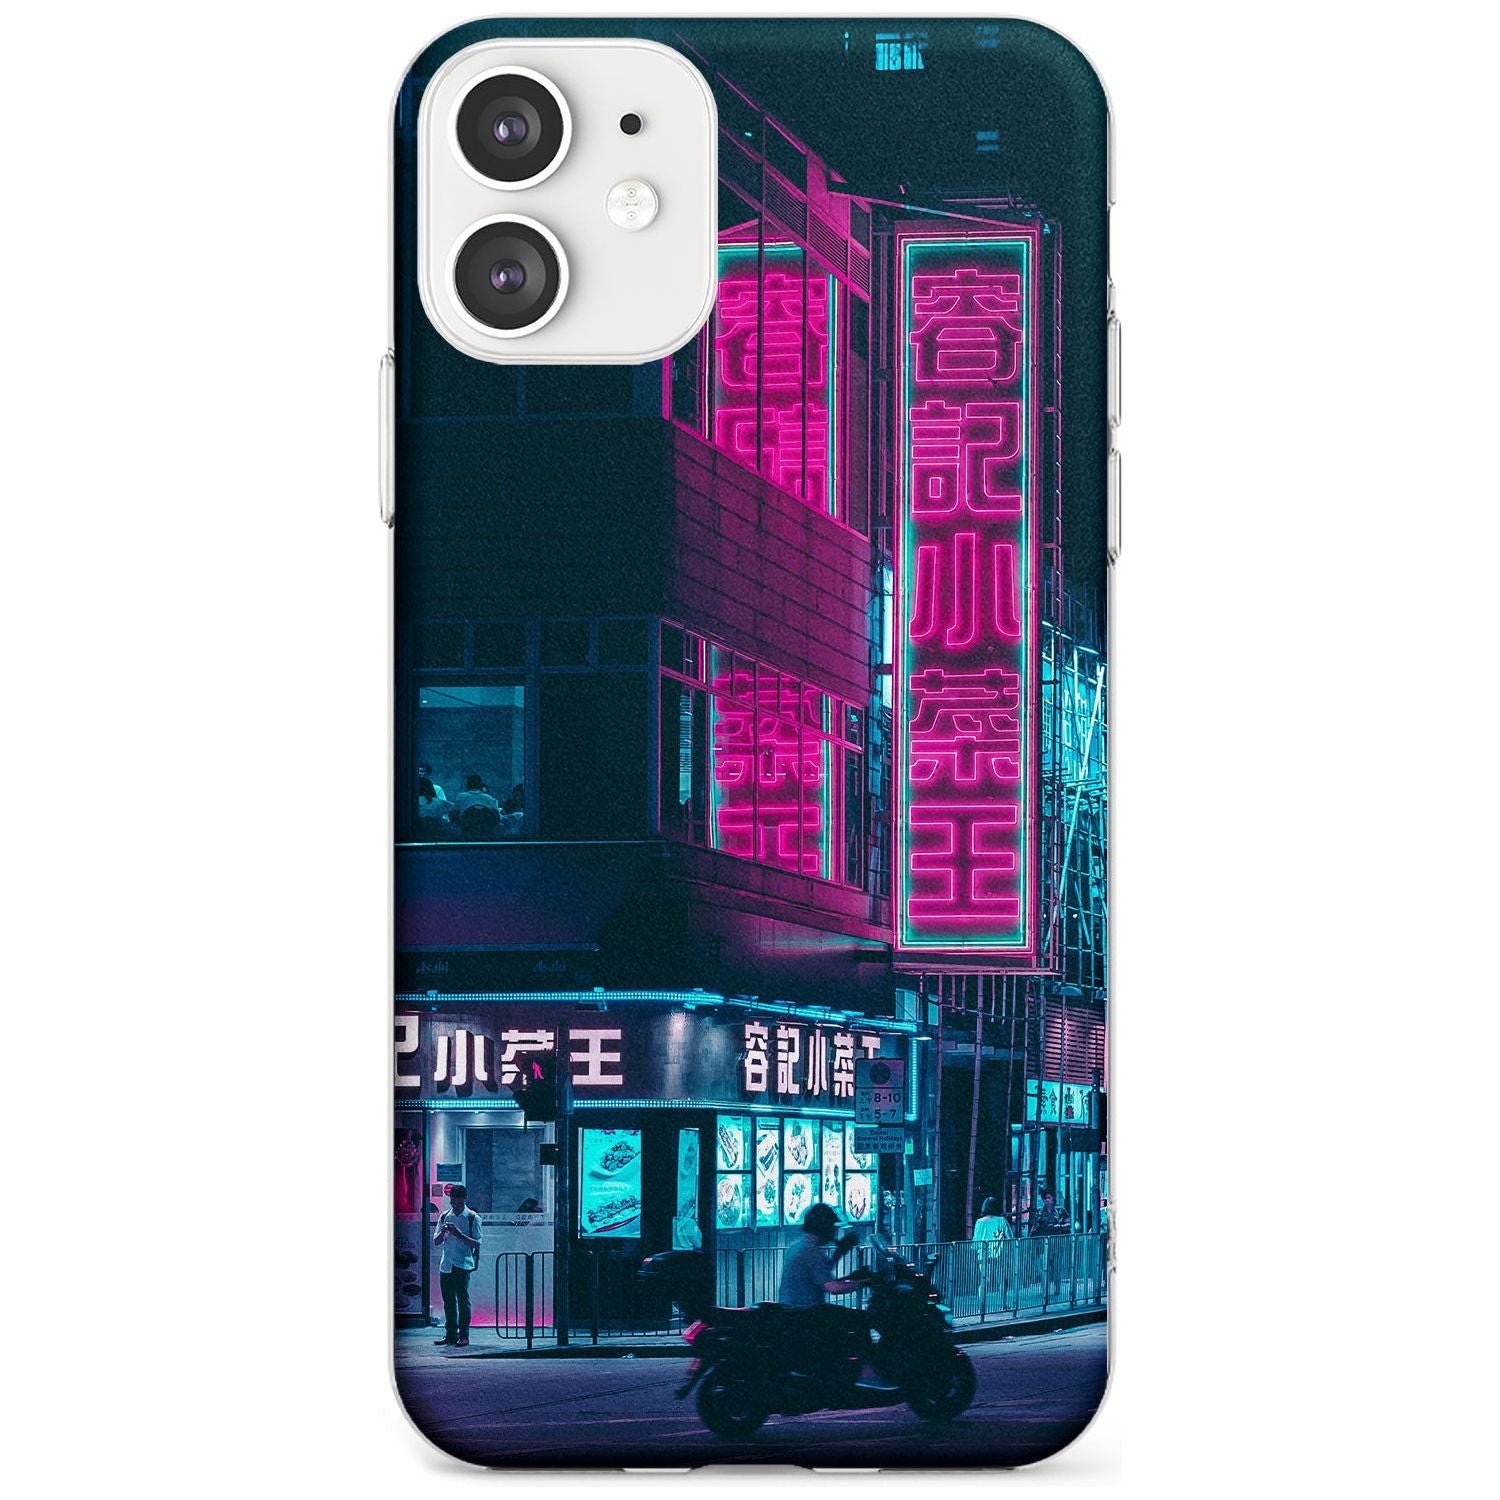 Motorcylist & Signs - Neon Cities Photographs Slim TPU Phone Case for iPhone 11